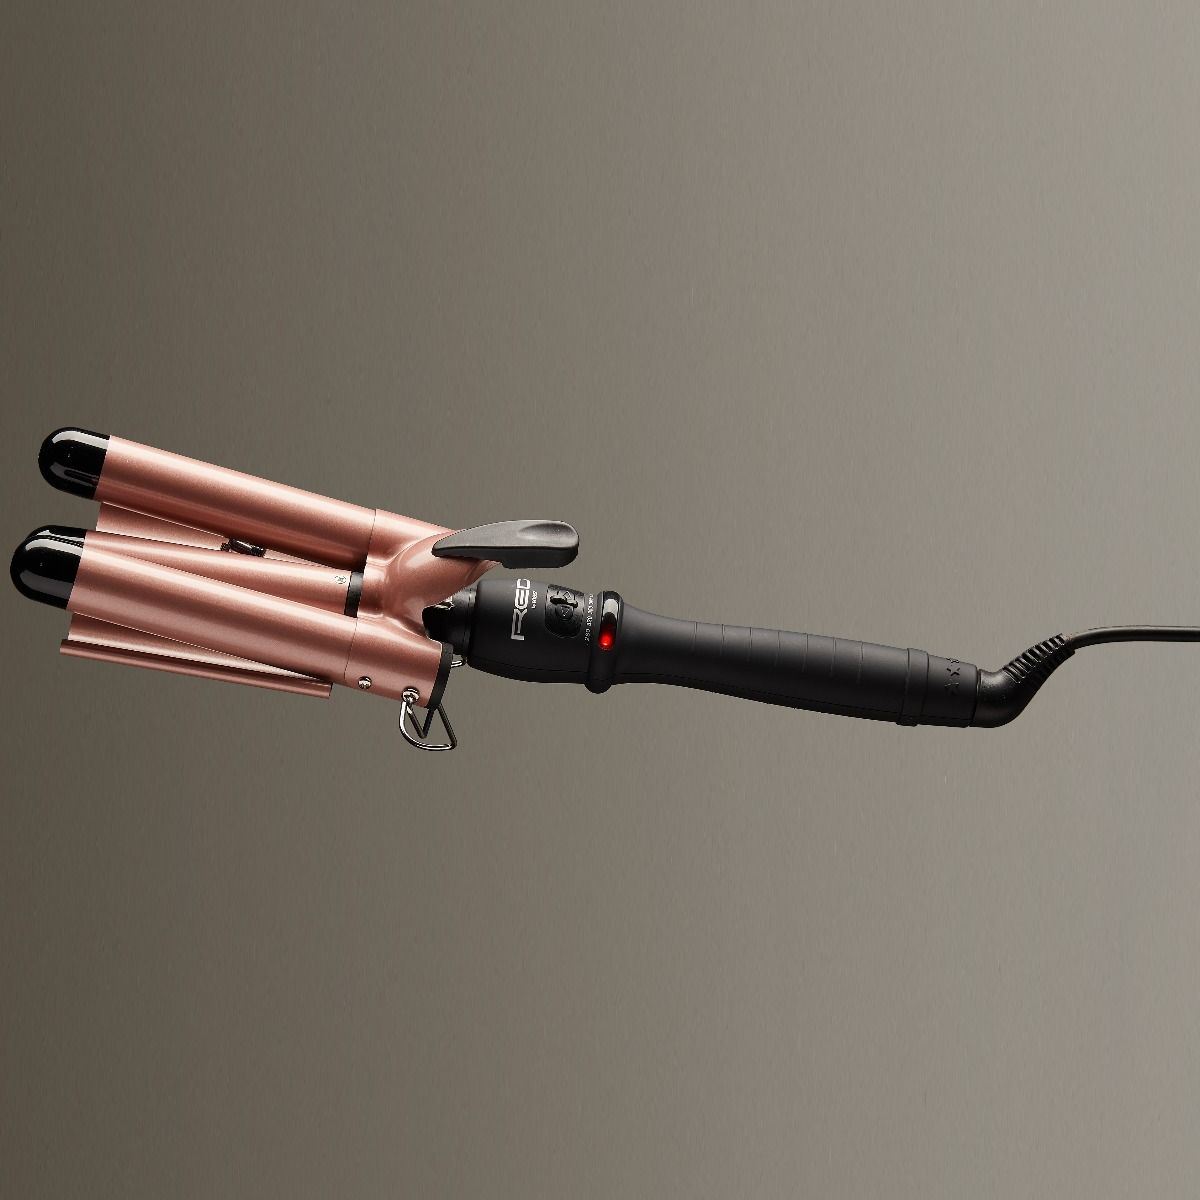 RED 1" Triple Barrel Curling Iron Up to 430°F, Worldwide Voltage